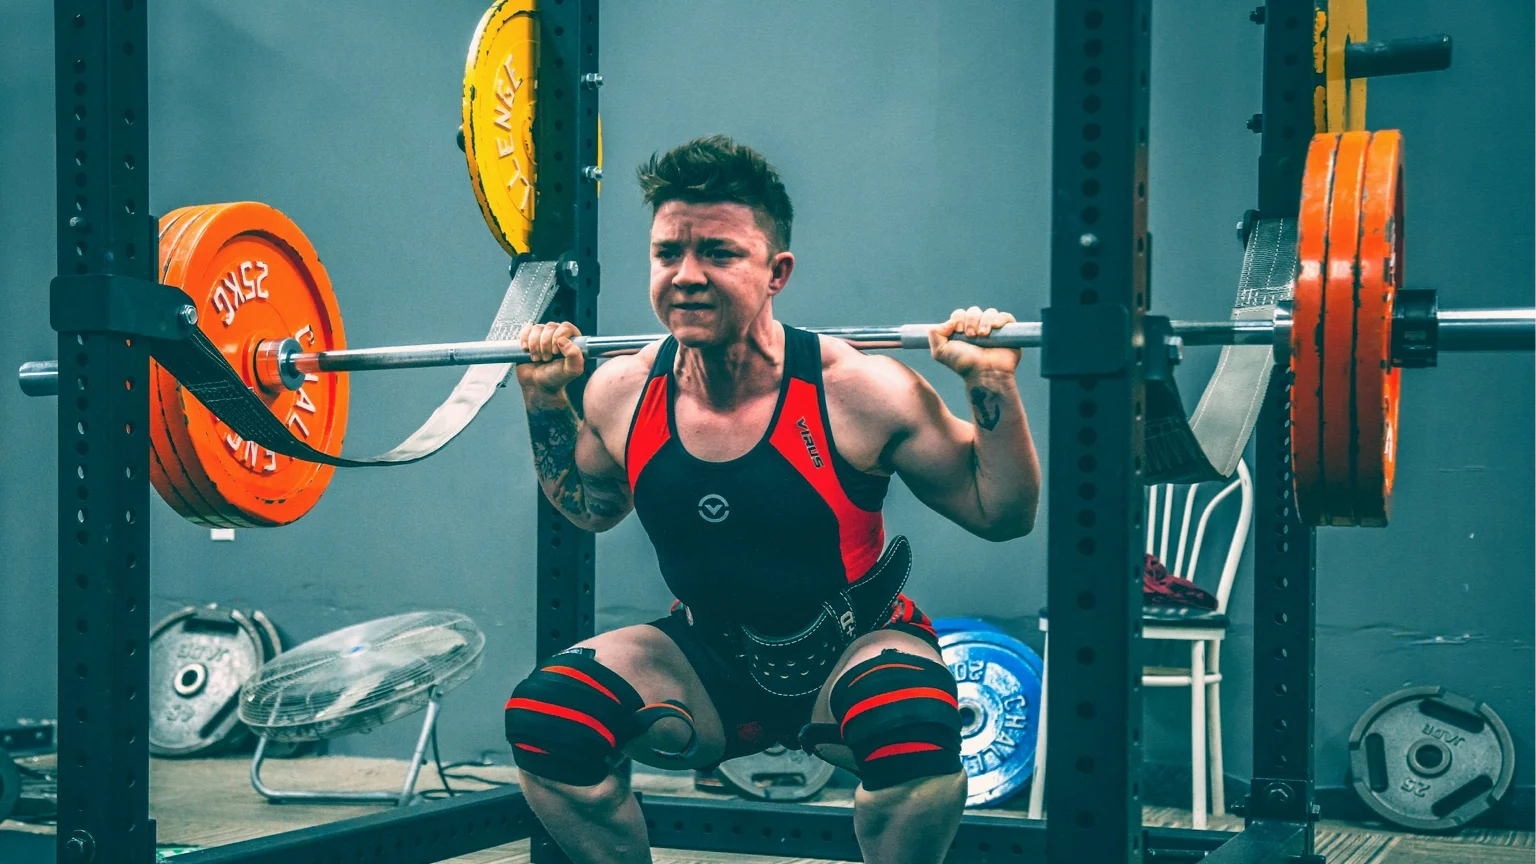 More and more people choosing to enter powerlifting meets and competitions